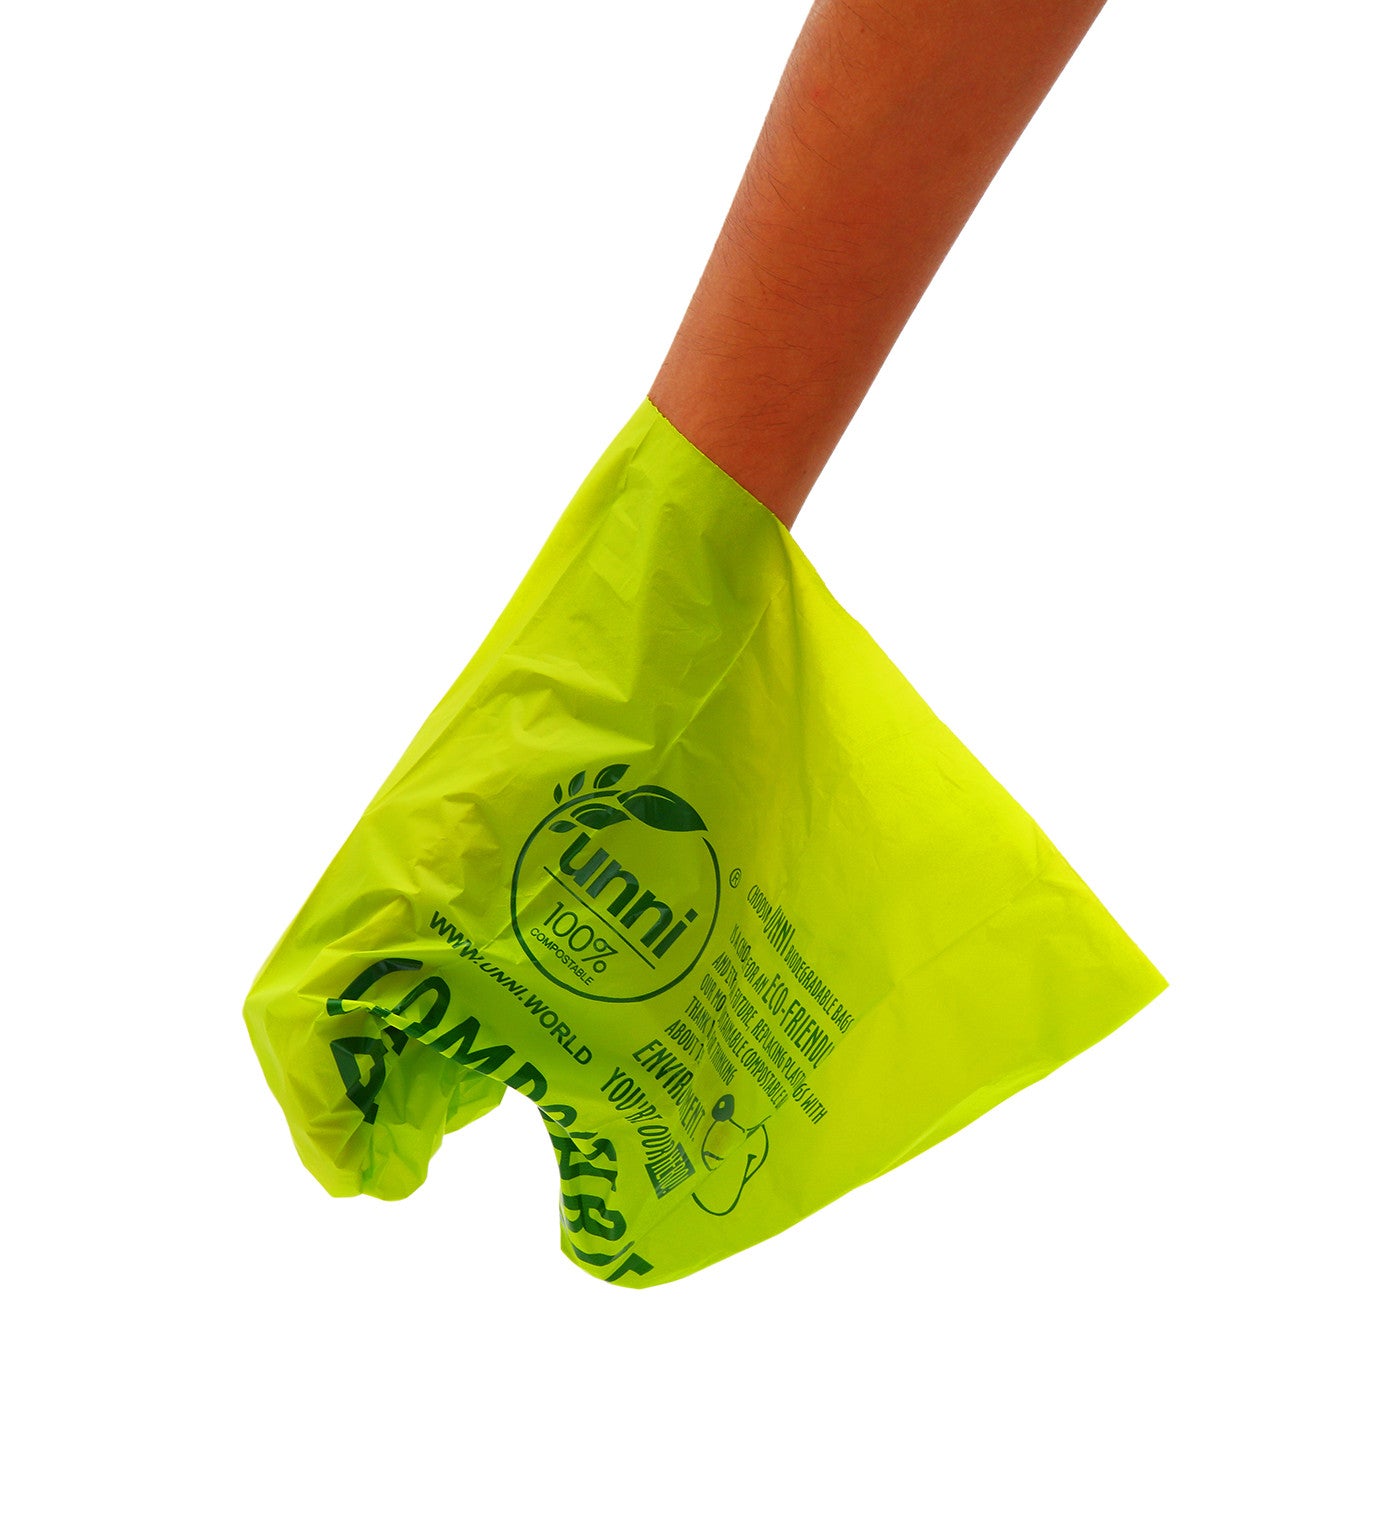 Dog Waste Poop Bags, 300 Bags on a Single Roll